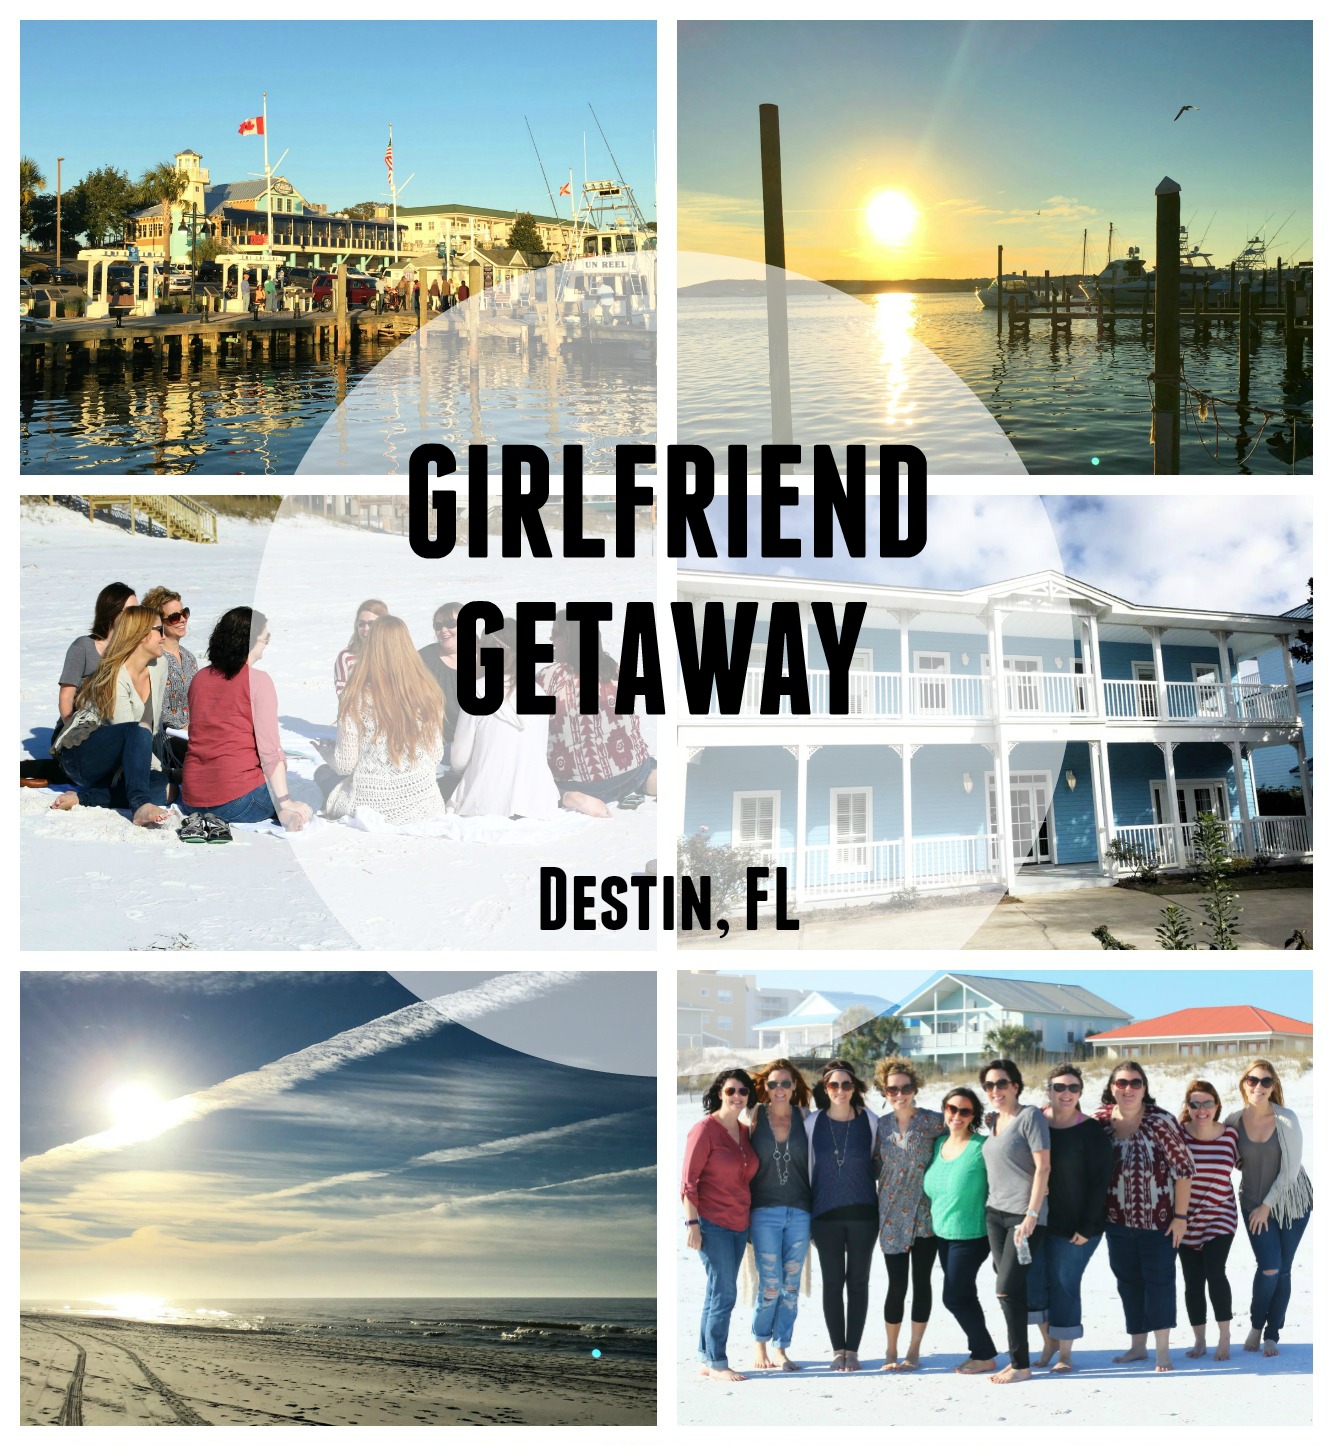 I had such a blast on my Girlfriend Getaway Weekend Vacation in Destin - Fort Walton Beach, Florida. Click through for information on vacation rentals, restaurants, and things to do in the area!